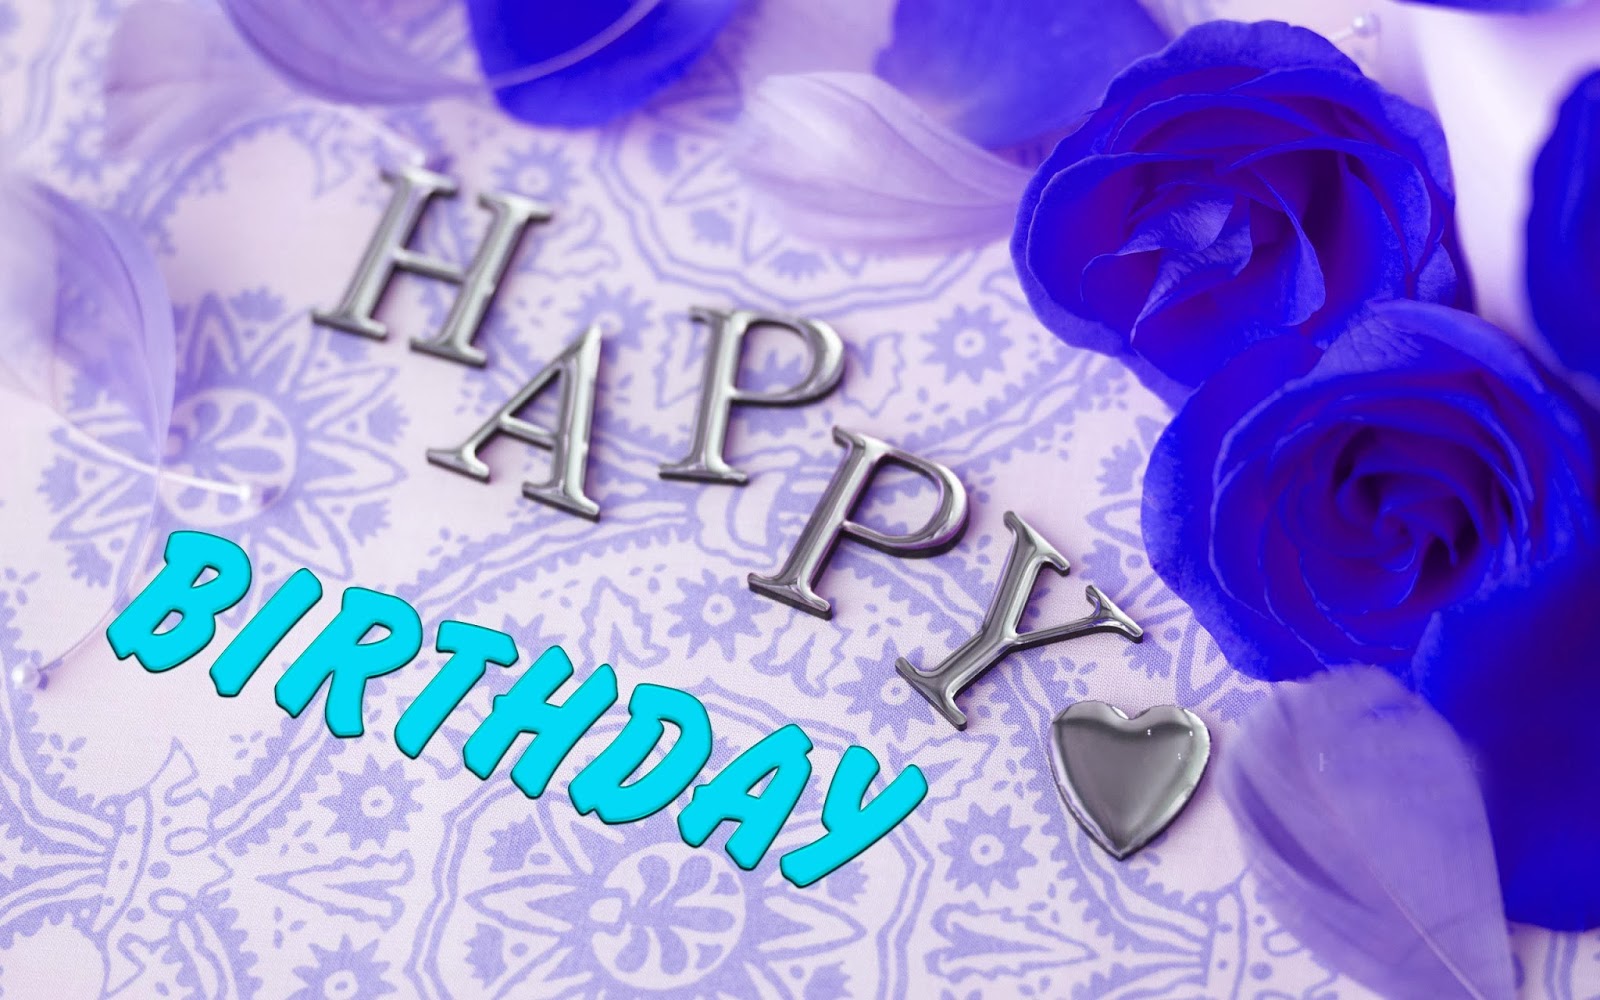 BirtHDay Wishes HD Wallpaper For Someone Special